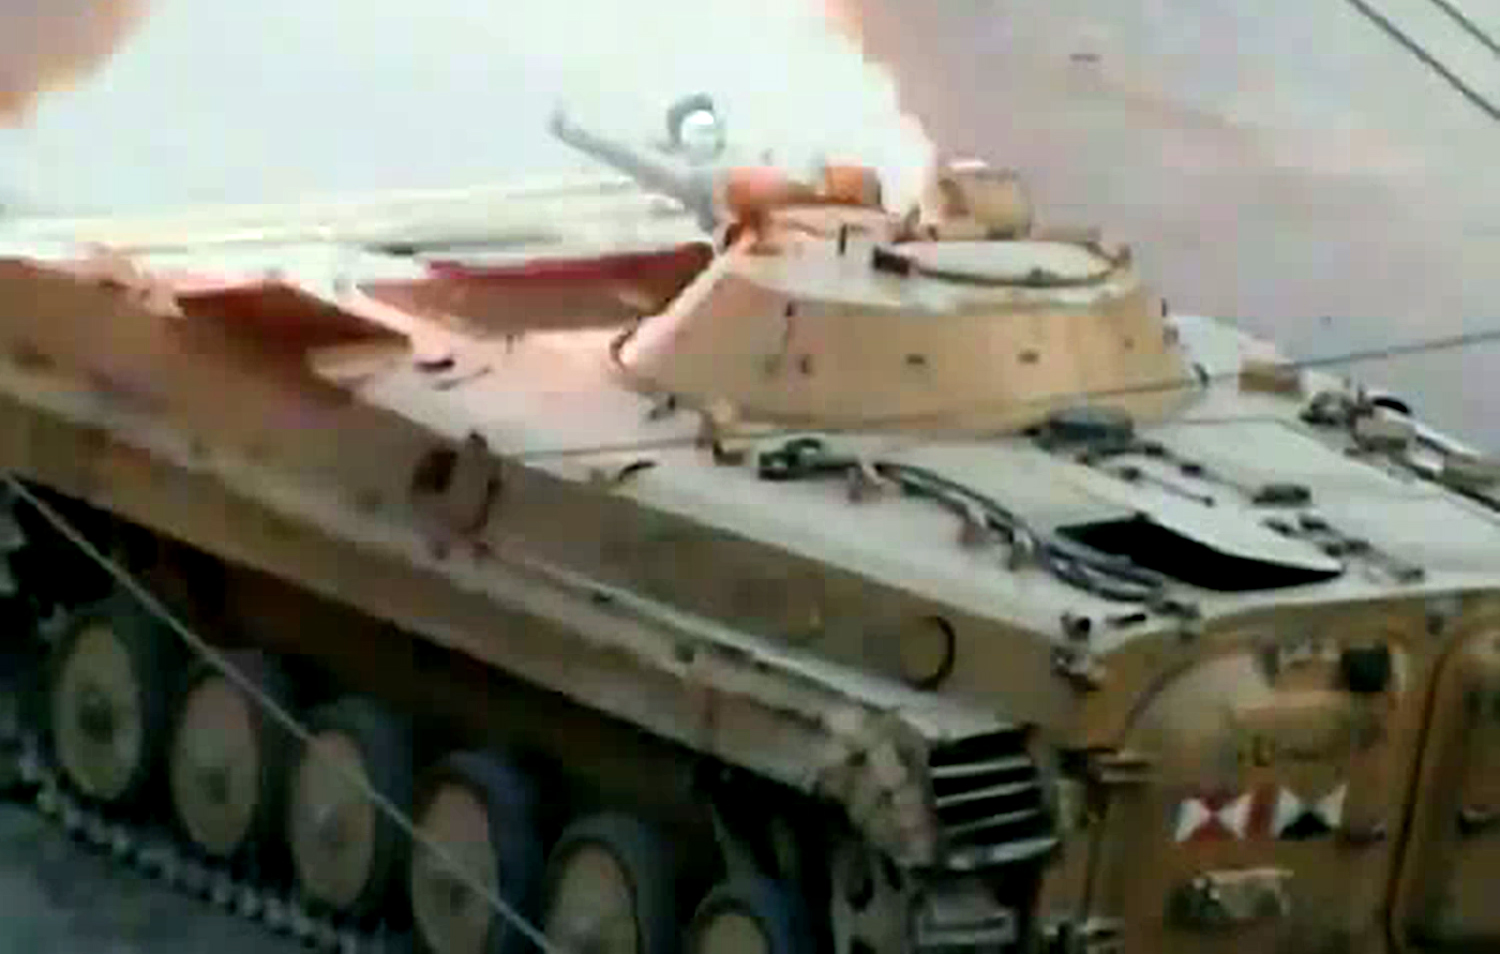 An image grab taken from a video uploaded on YouTube on July 17, 2012 allegedly shows a tank from forces loyal to Syria's President Bashar al-Assad firing a round in the city of Saqba, in Damascus province. AFP PHOTO/YOUTUBE